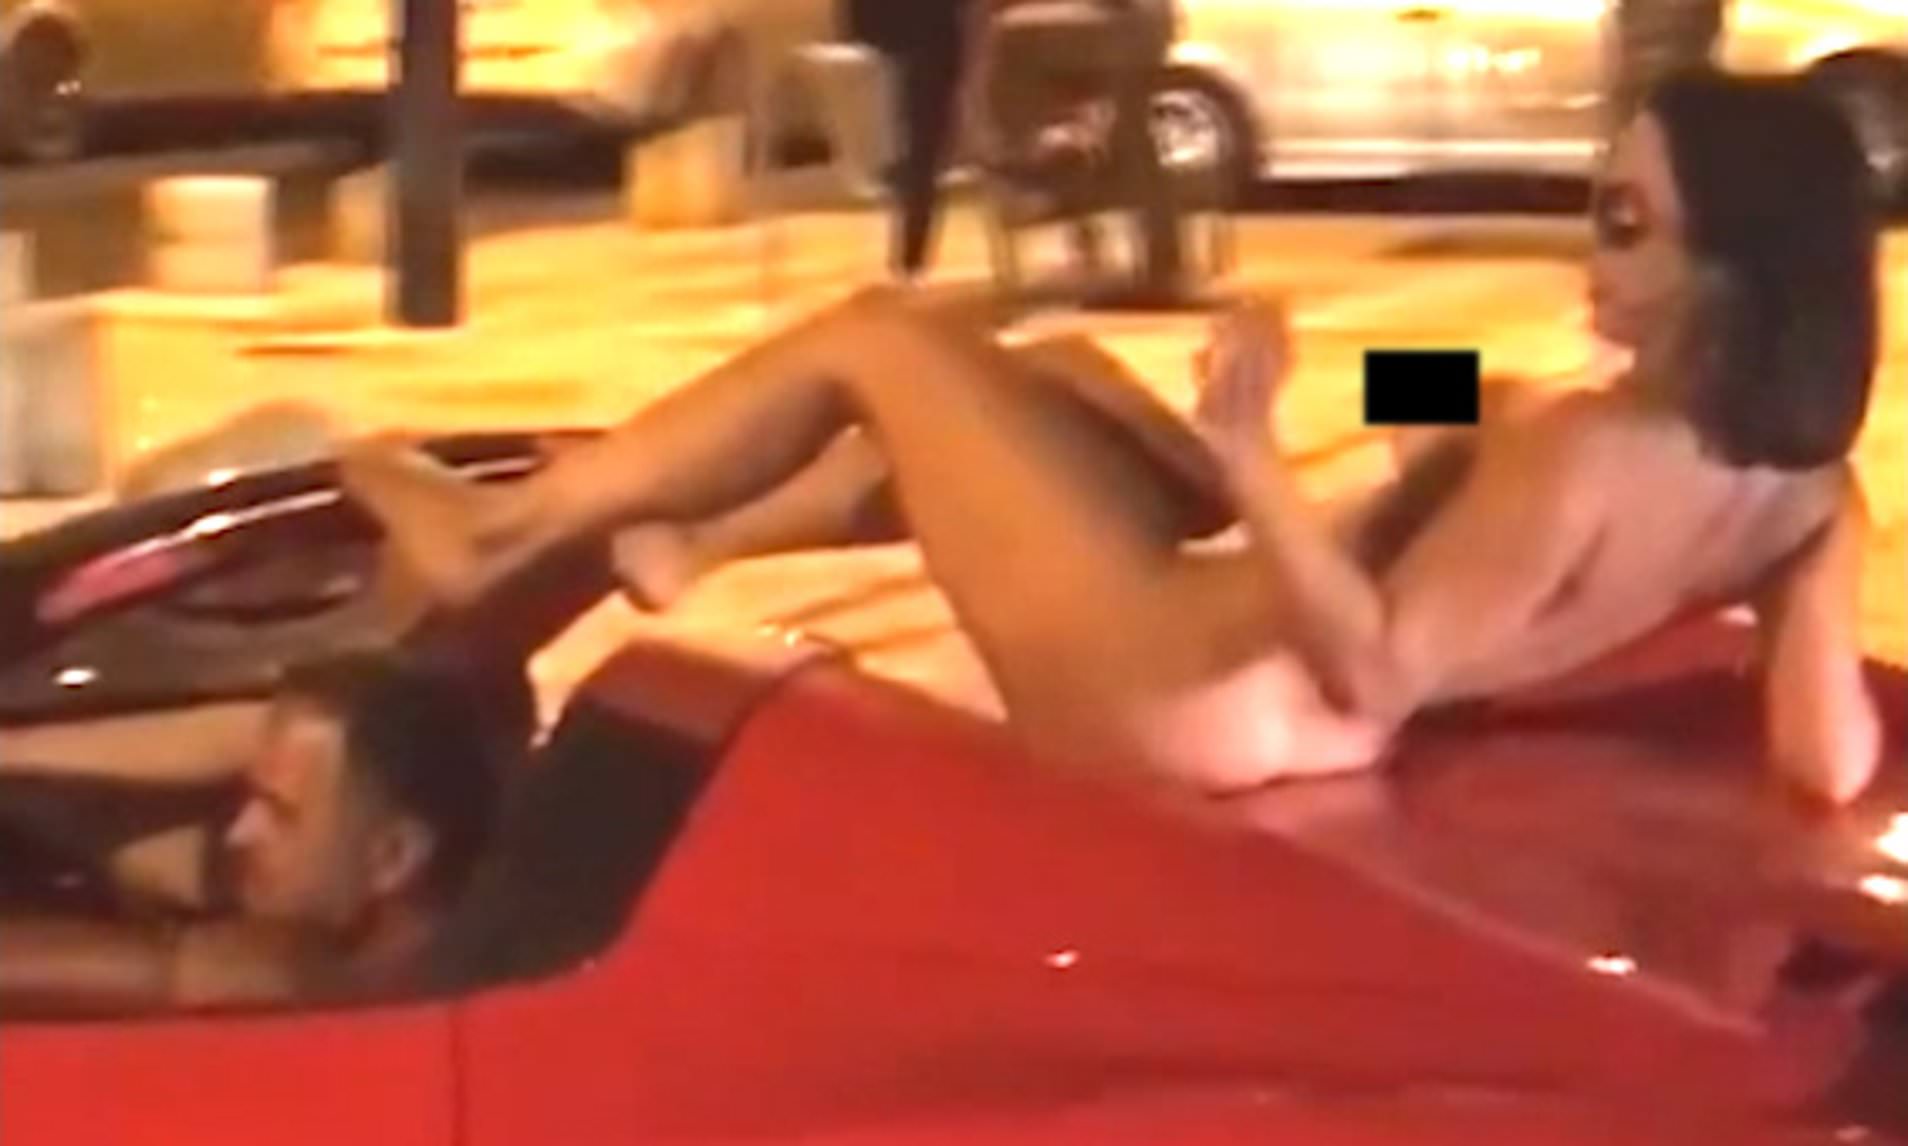 Naked woman sparks outrage after twerking on a Ferrari at Ibiza in August 2019.